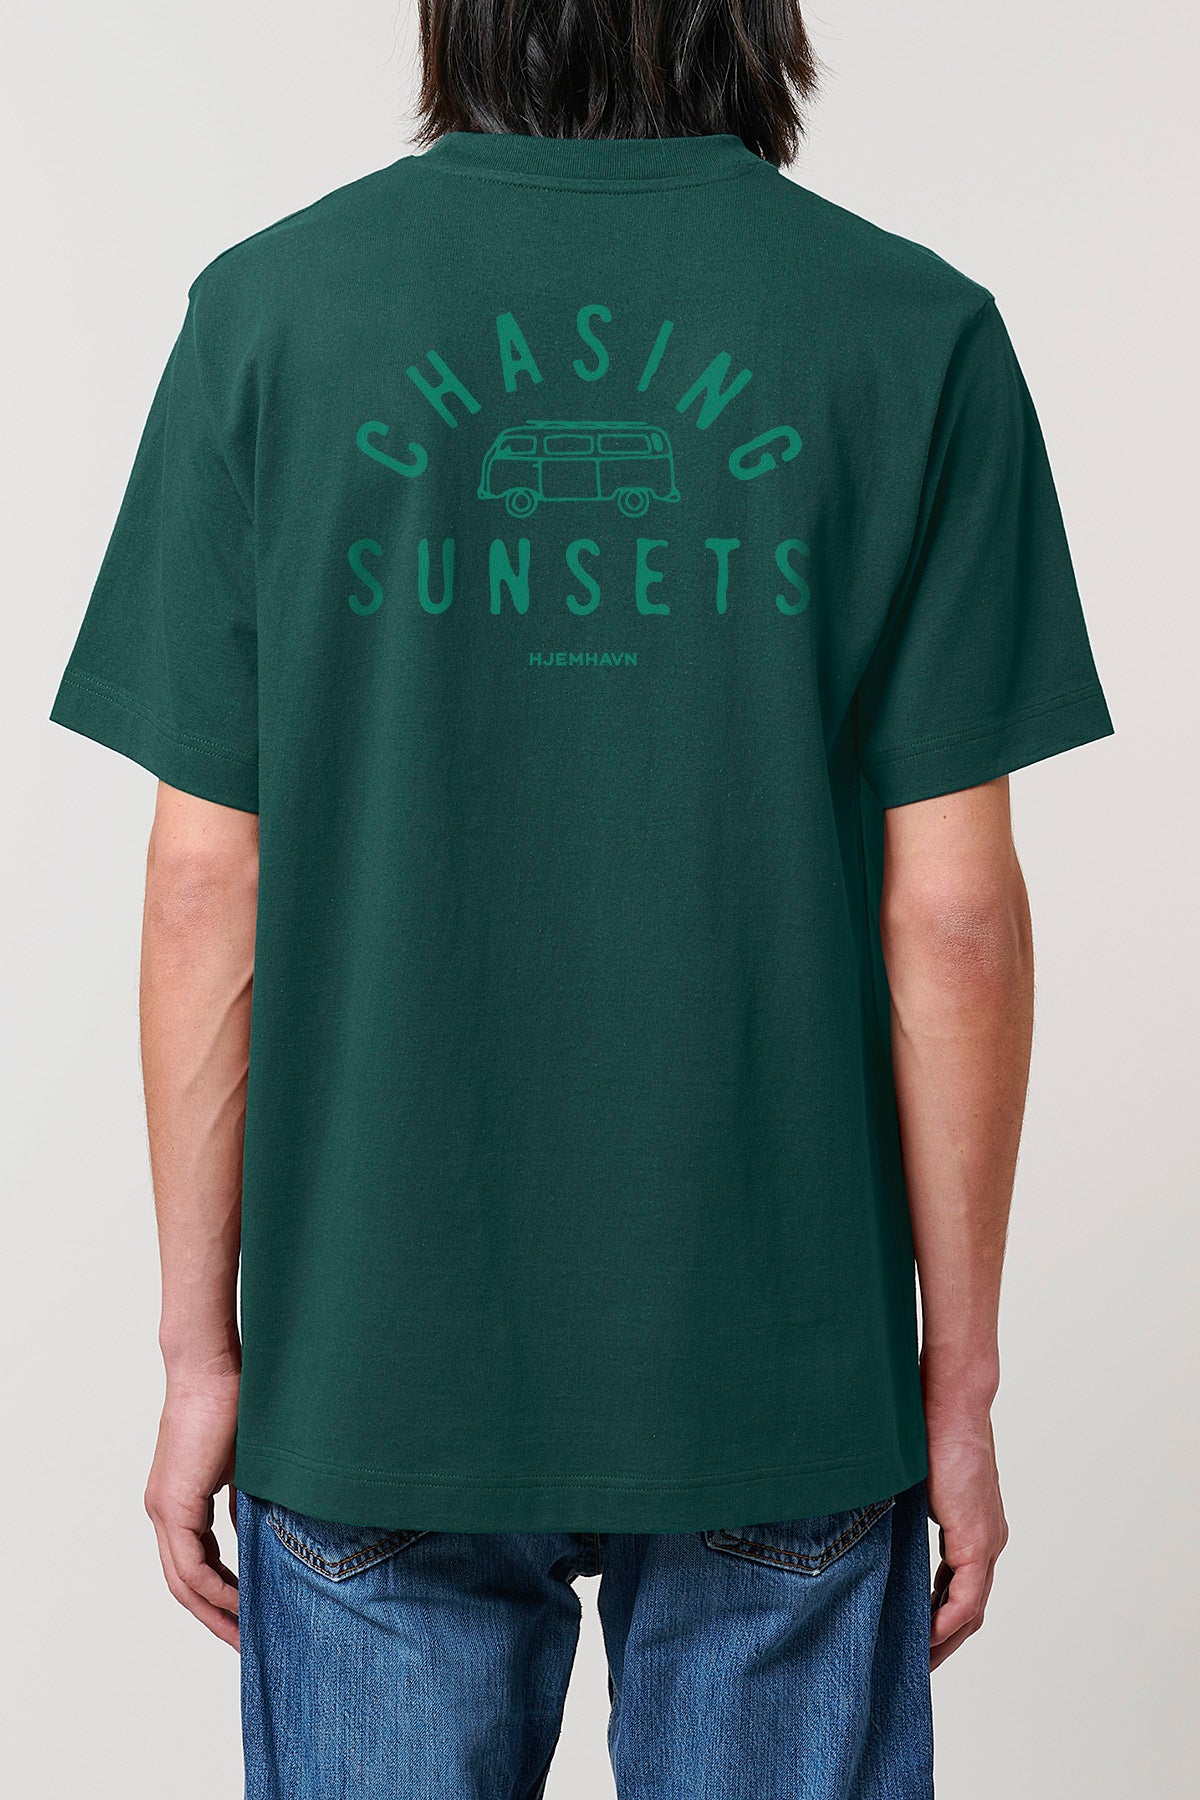 Heavy Weight Tee "Chasing Sunsets"